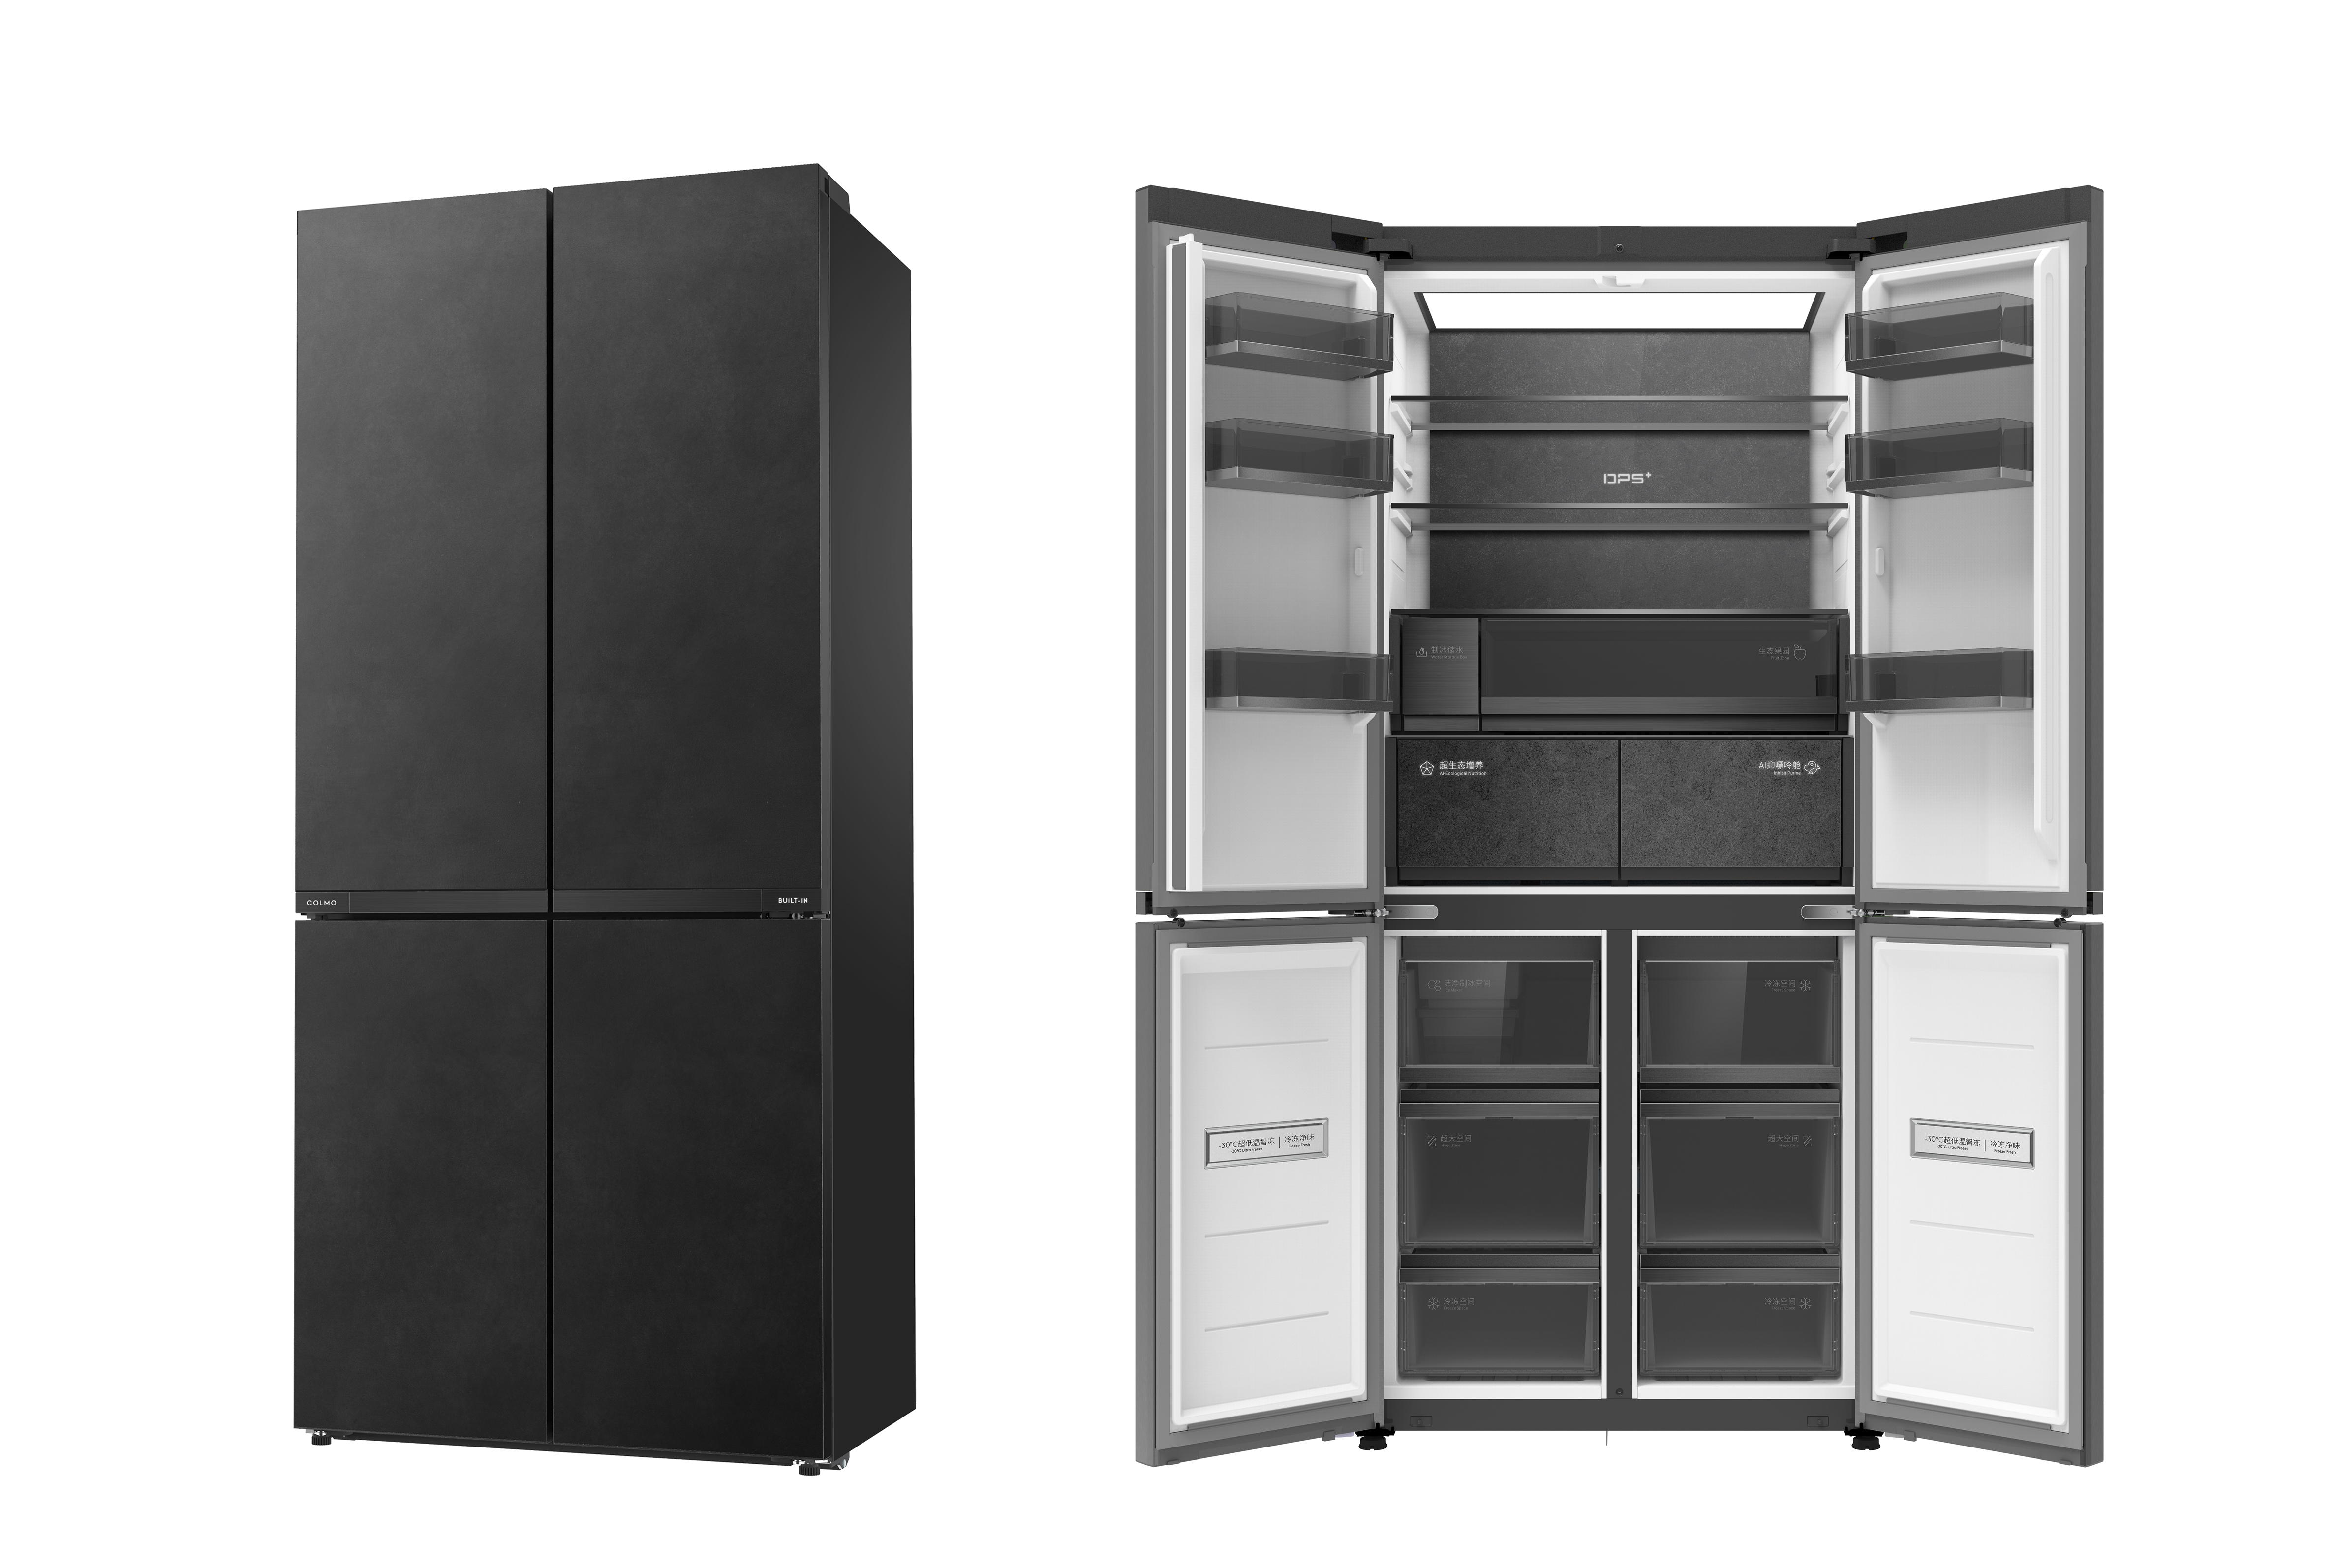 COLMO-Free Flat-Panel Built-in Refrigerator